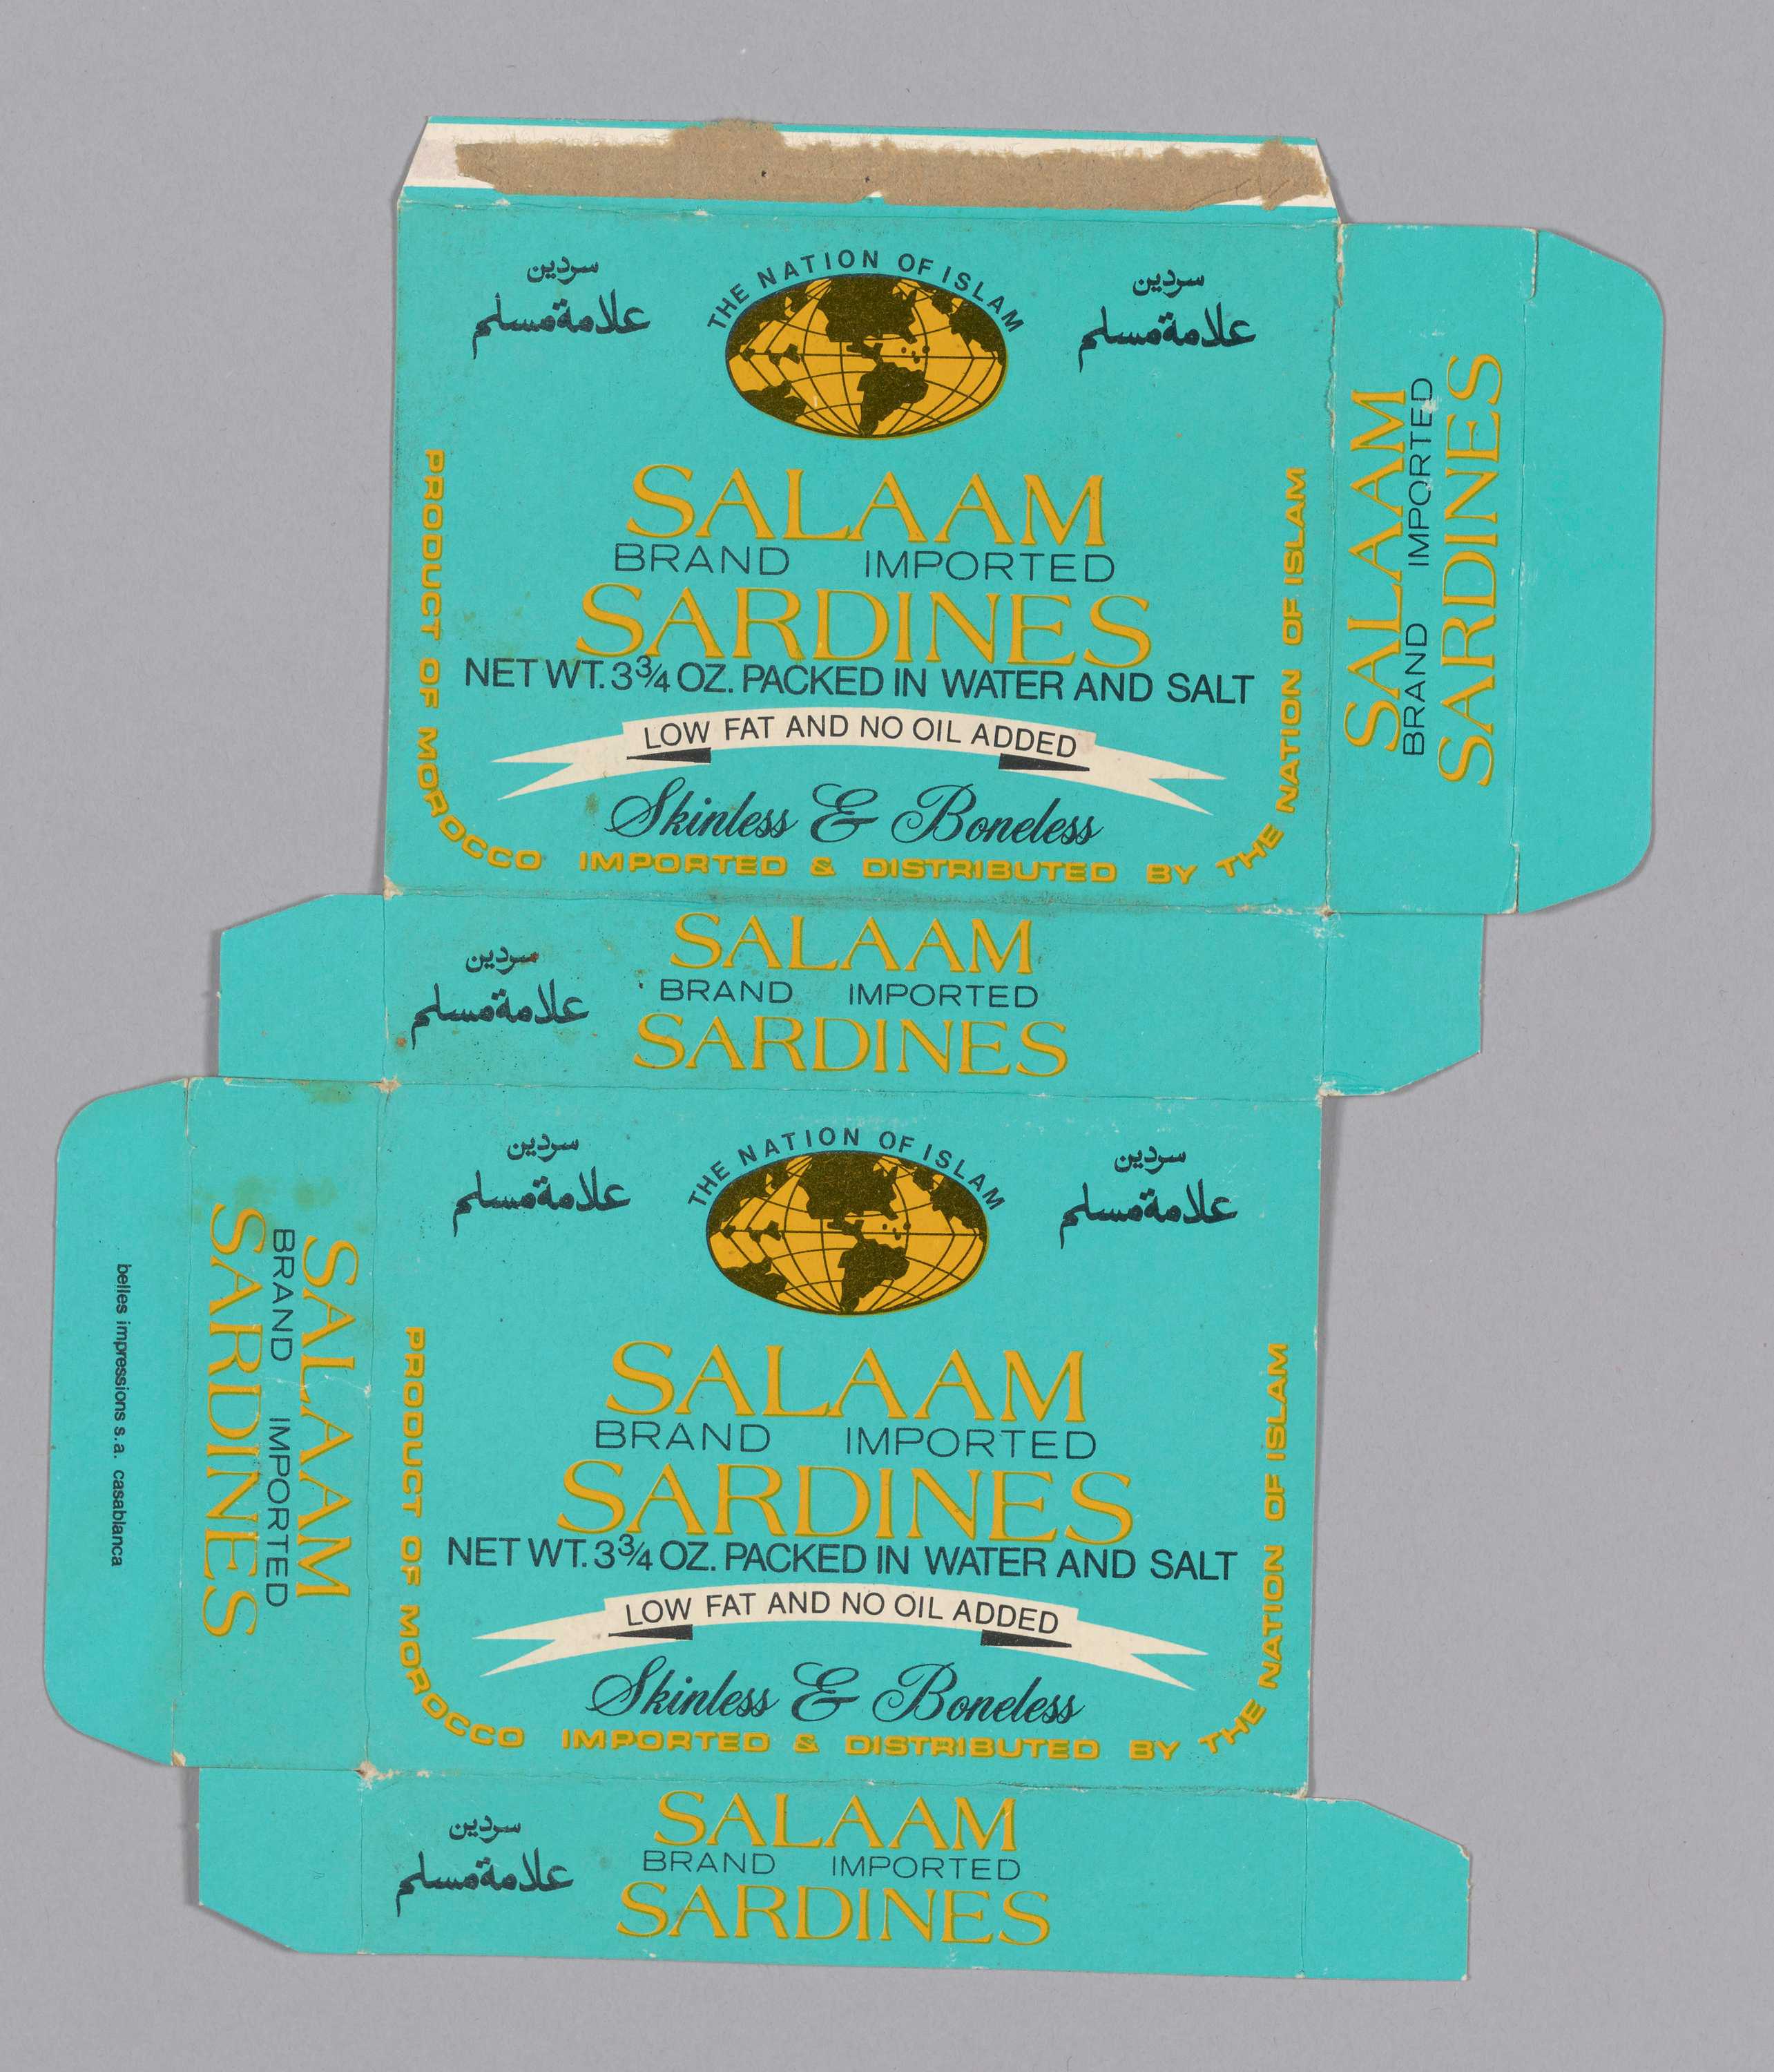 Packaging for sardines imported and distributed by Salaam International, a division of the Nation of Islam.